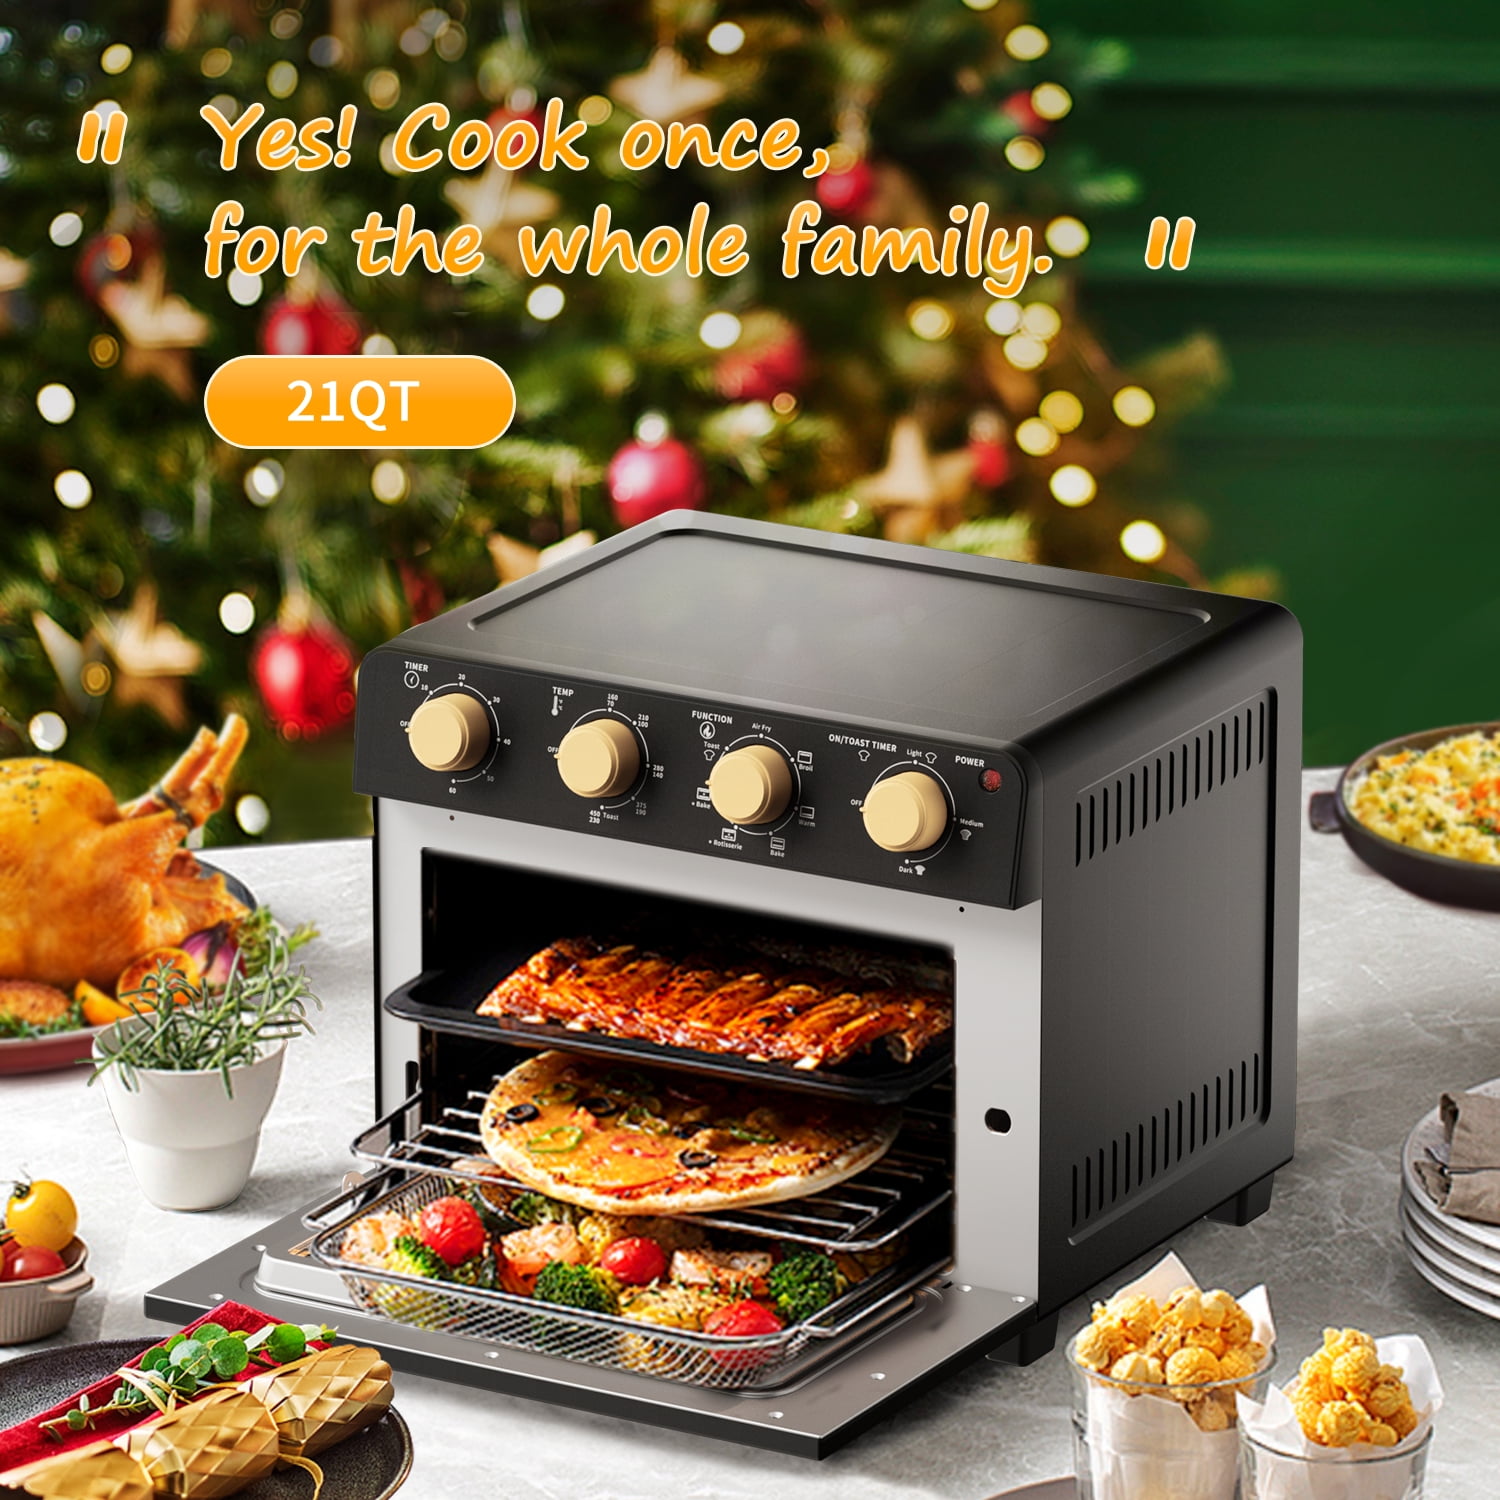  Air Fryer Toaster Oven, Feekaa Black and Gold Toaster, 4 Slice,  21QT 1700W Convection Countertop, 7-in-1 Combo, 7 Accessories, Healthy  Cooking User Friendly : Home & Kitchen